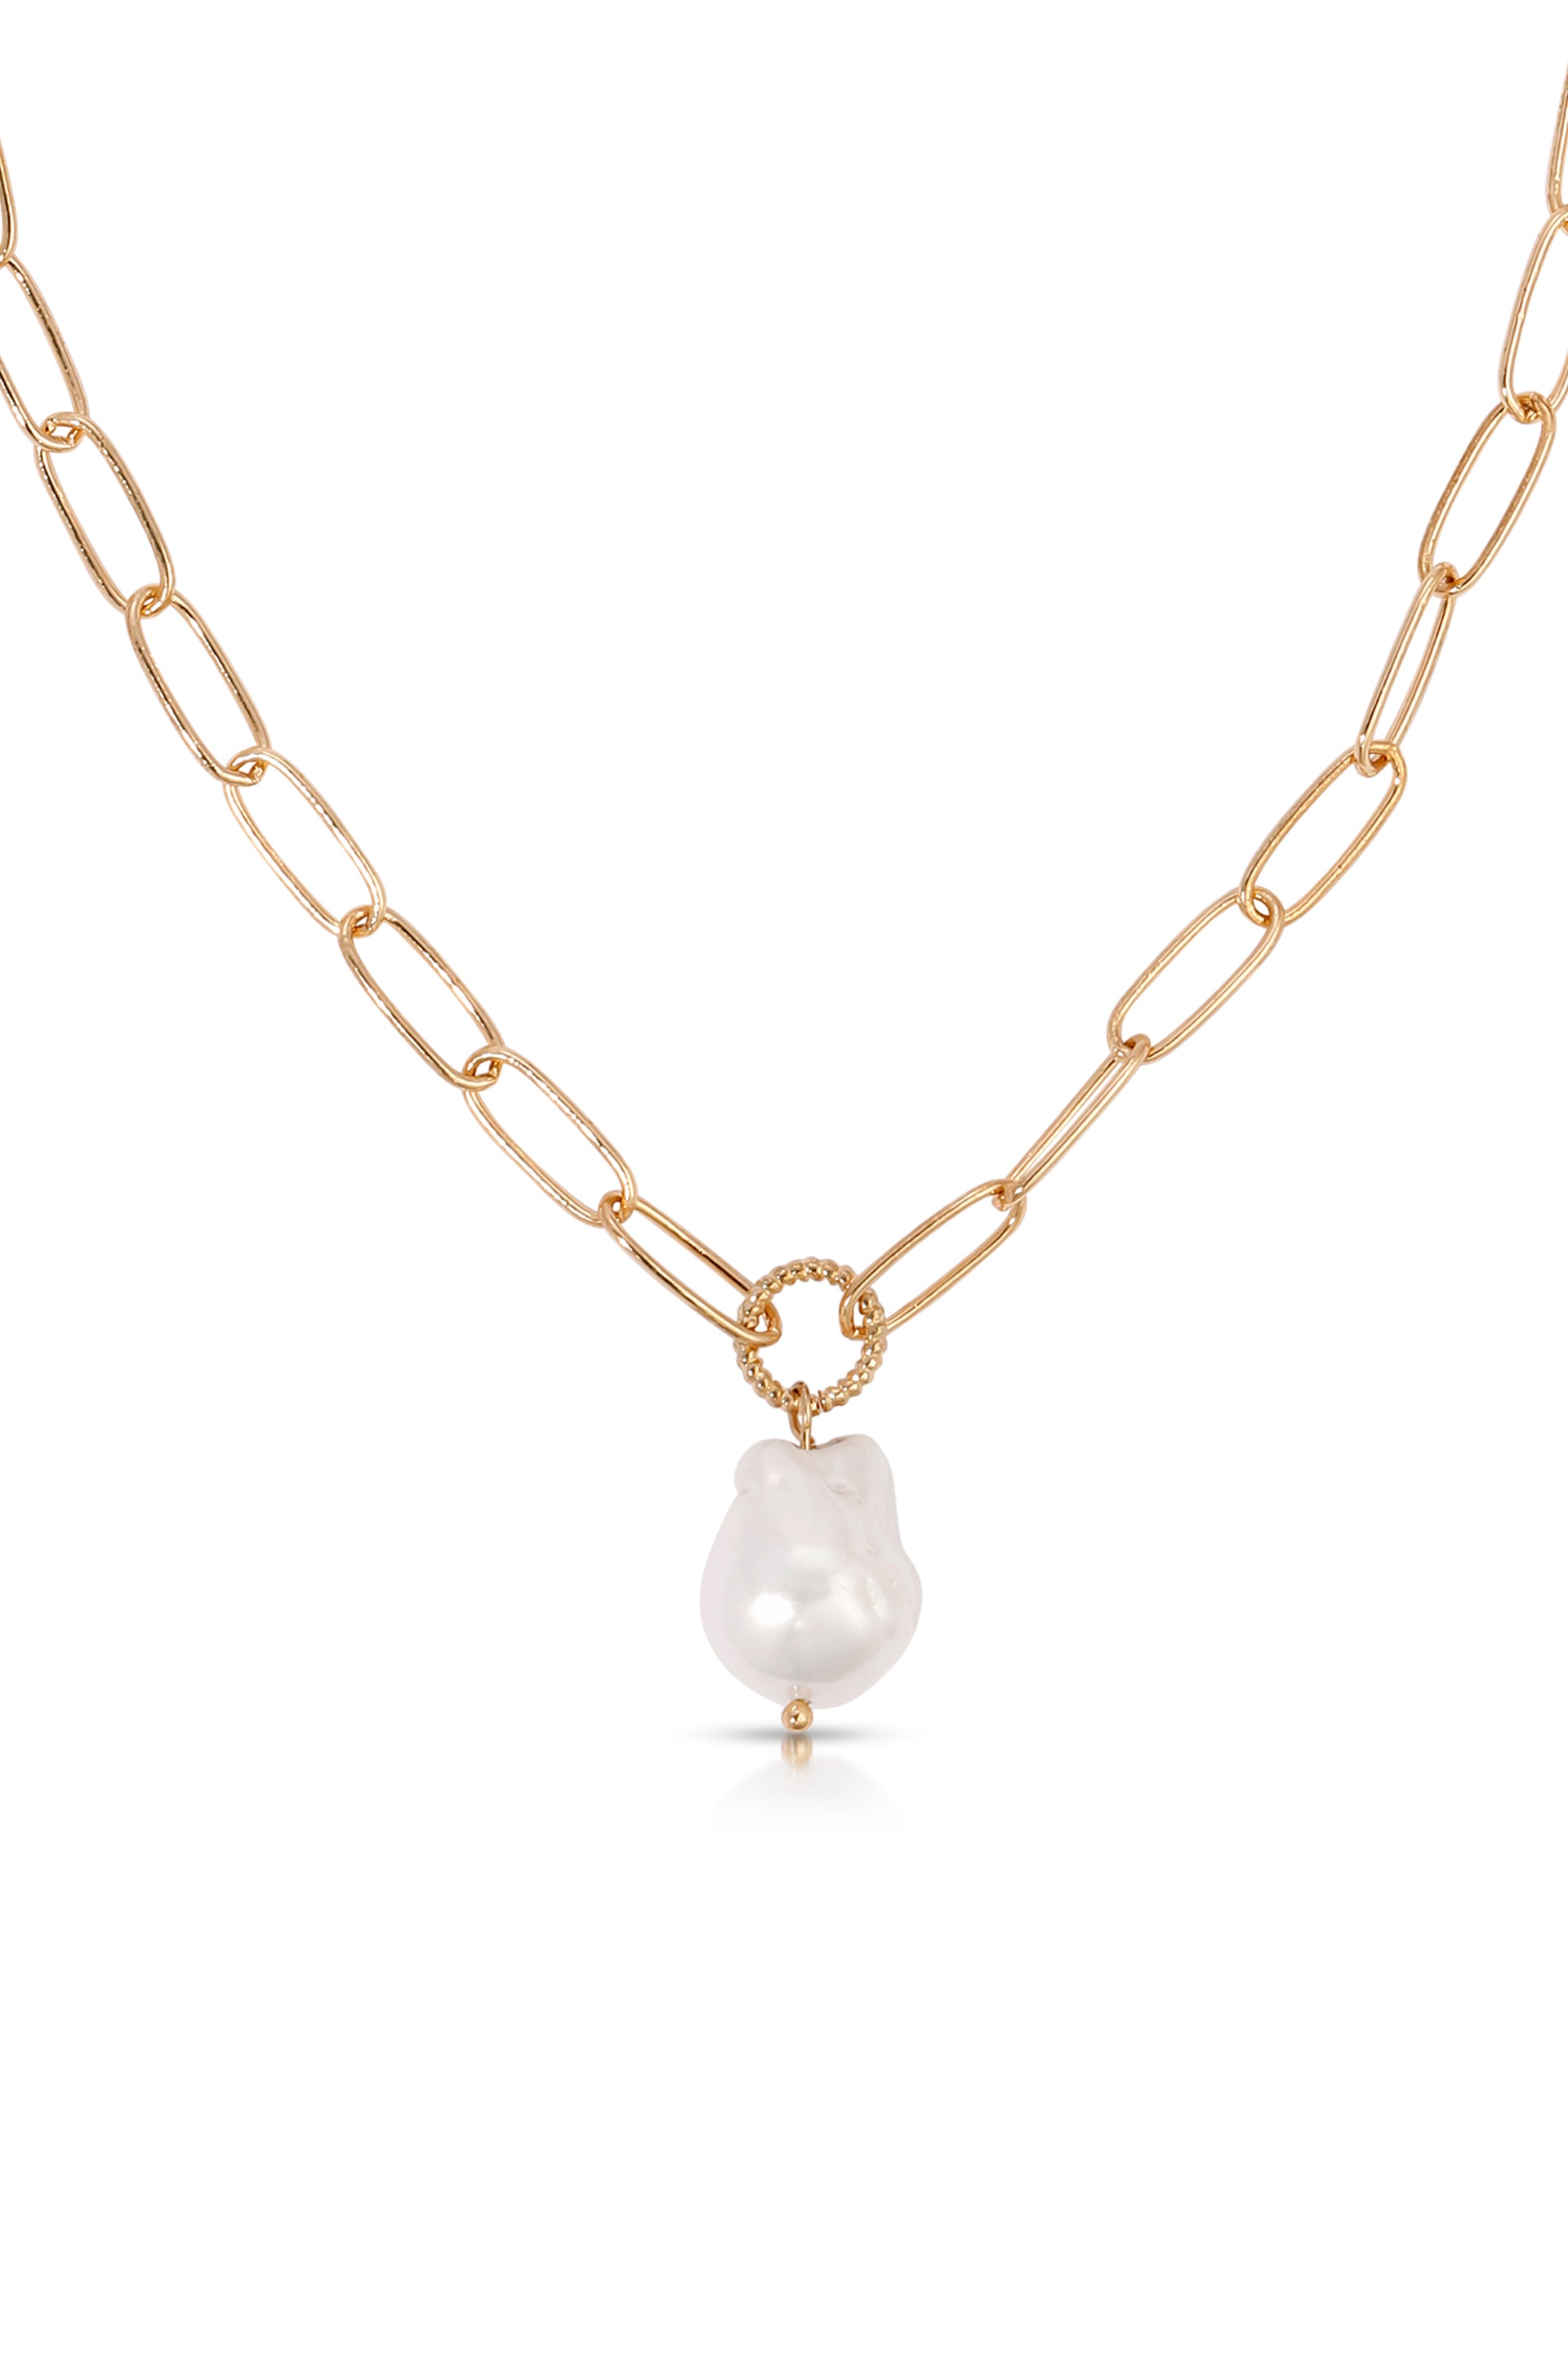 Single Pearl Open Links 18k Gold Plated Chain Necklace in white pearl close up